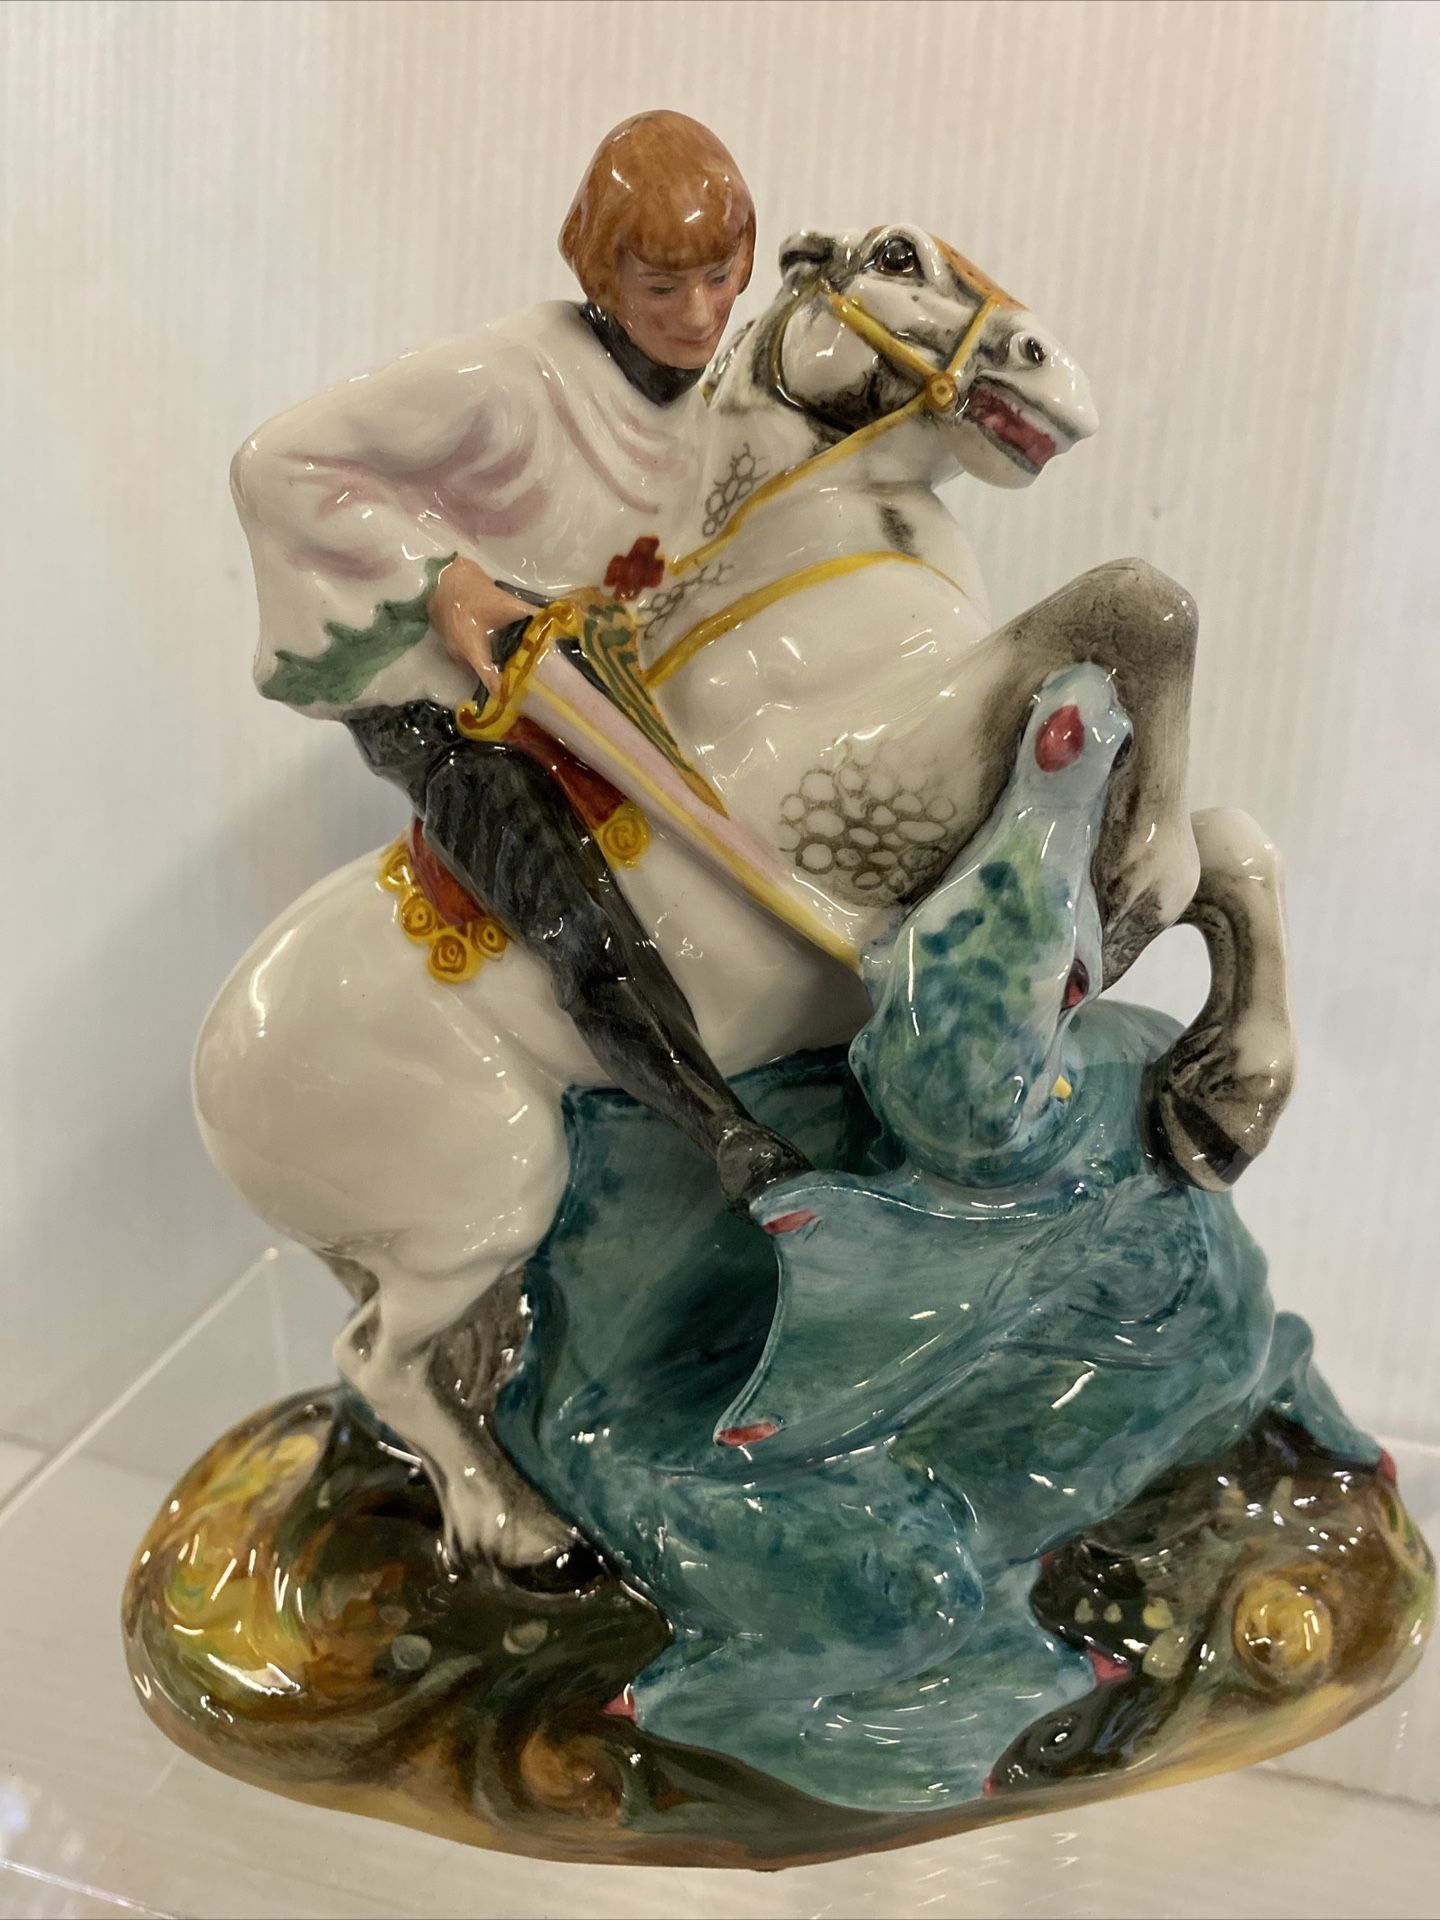 Royal Doulton Figurine St. George  HN 2051  7-1/2" tall  (Mint Condition)